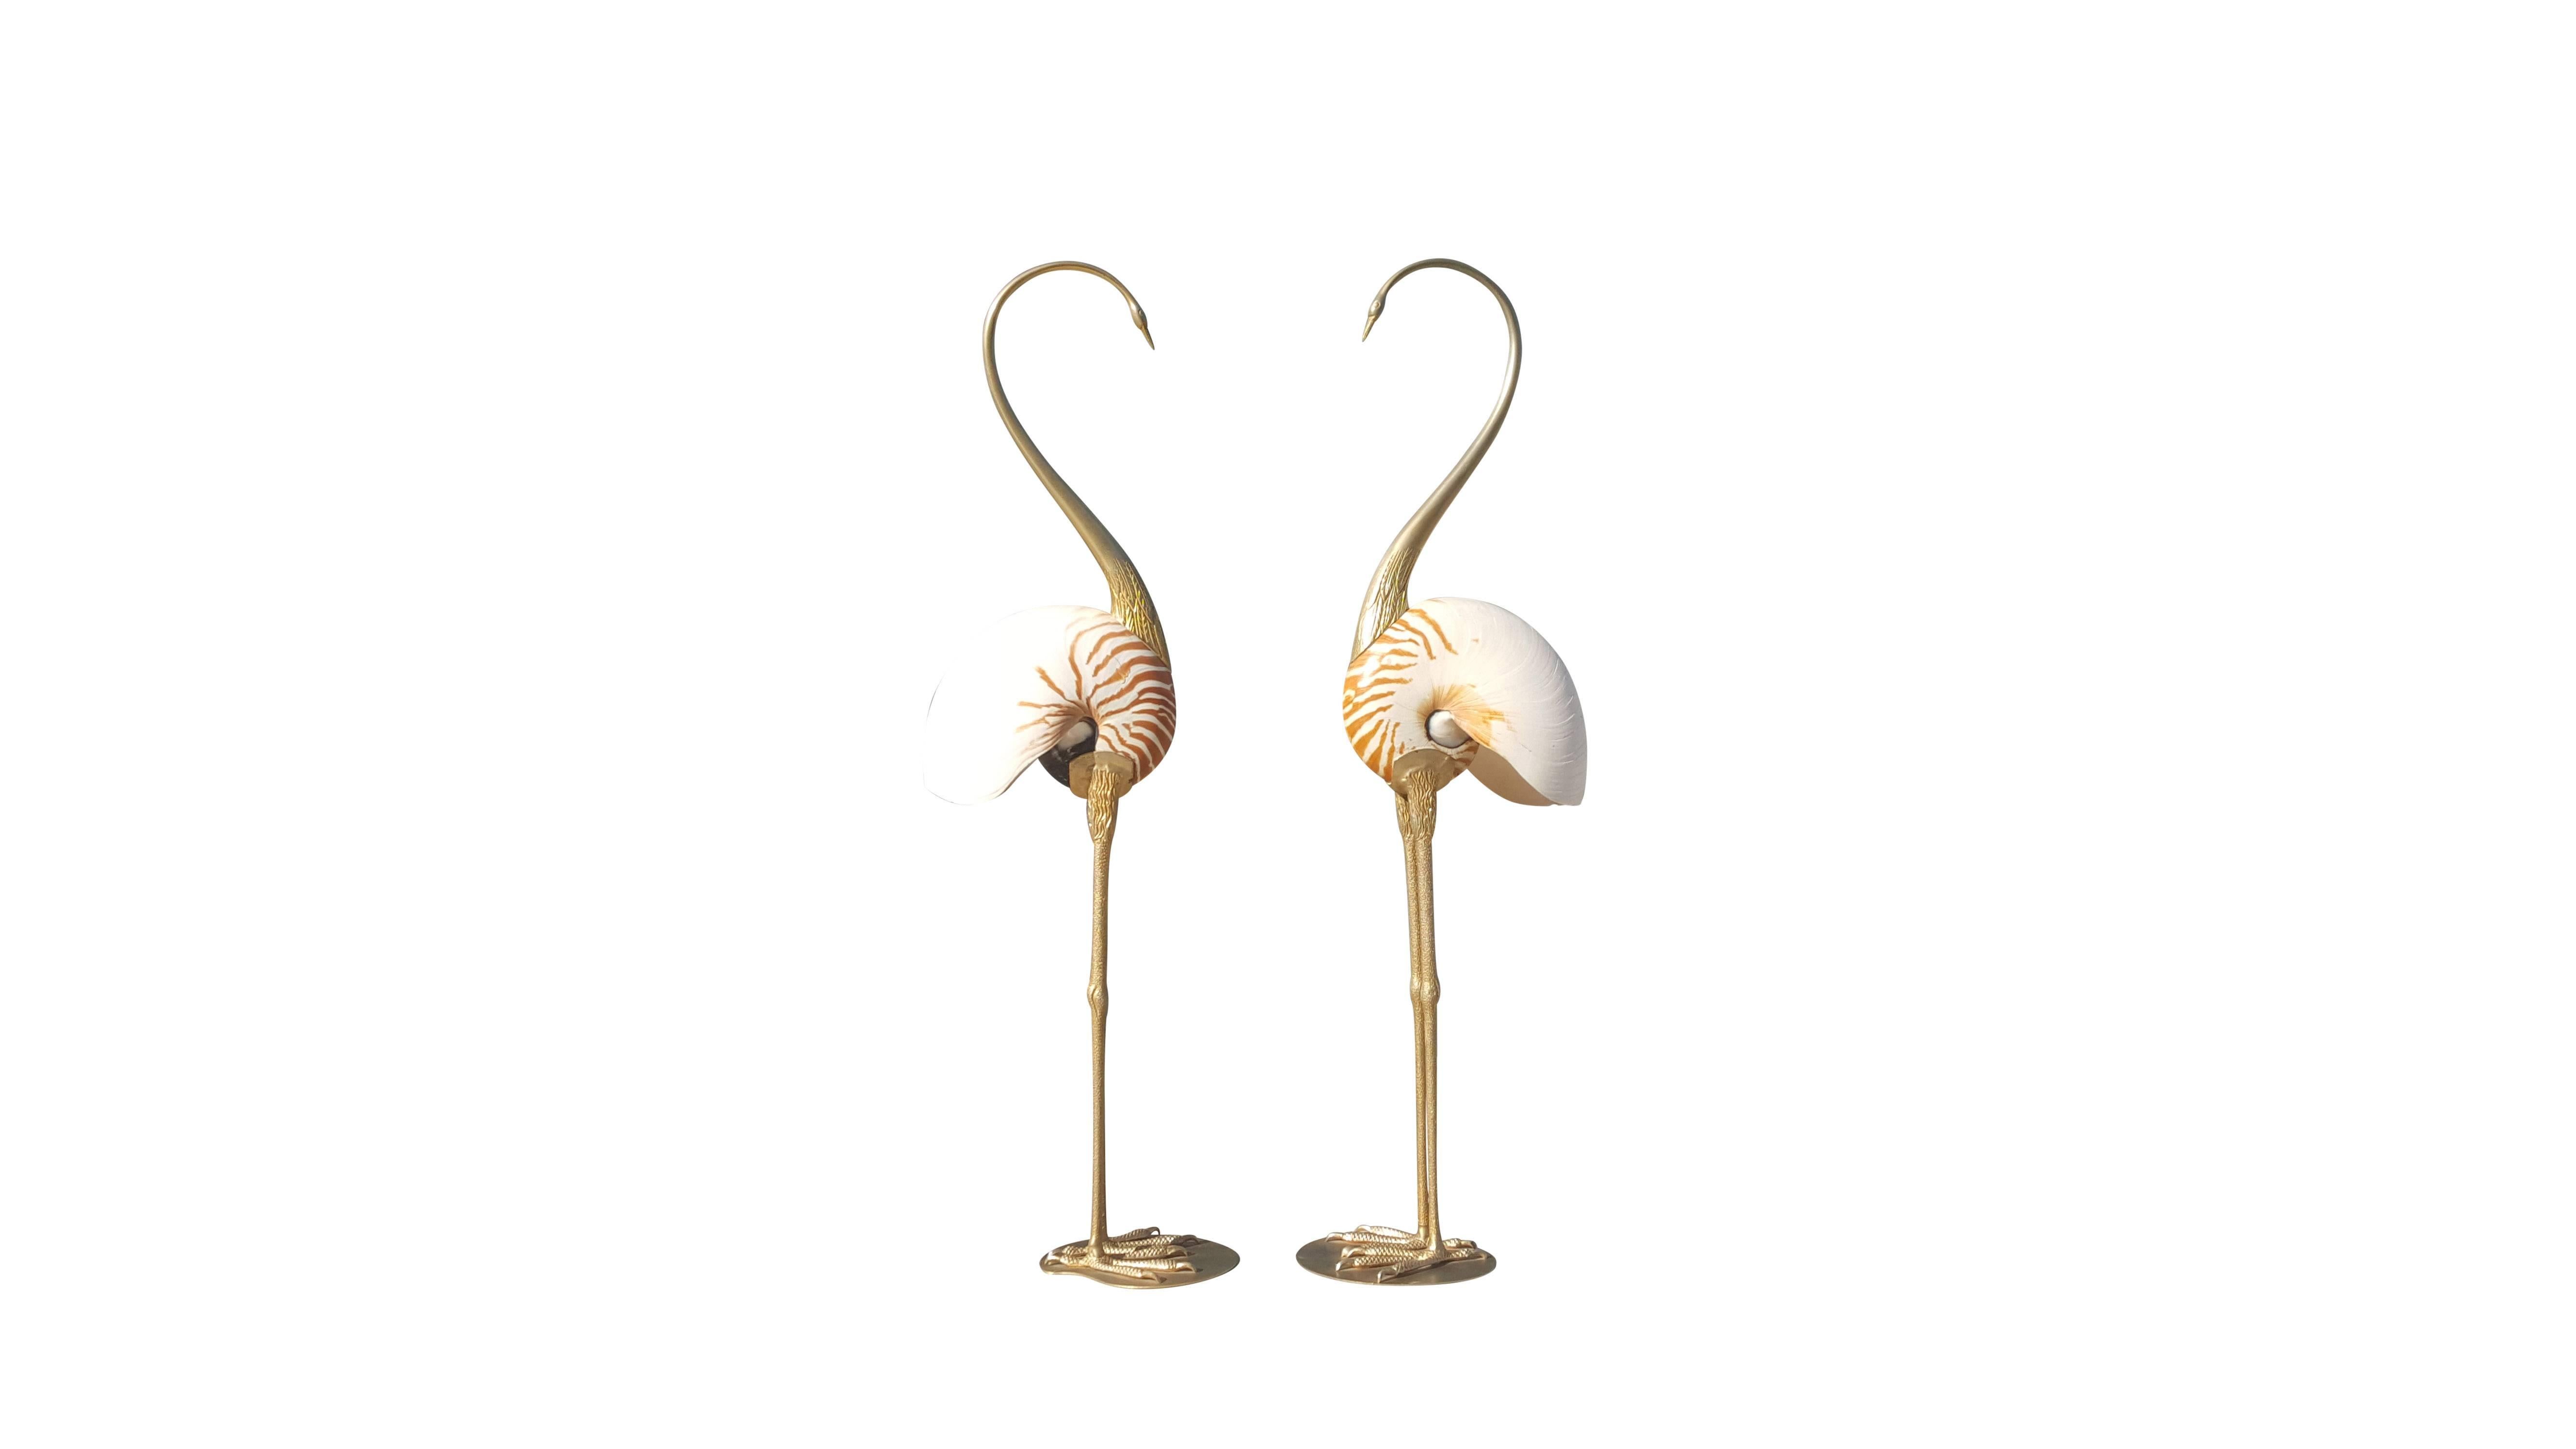 Beautiful pair of flamingos, storks made in the 1970s from Italy.
Nice pink, orange shell in the middle with brass legs and heads.